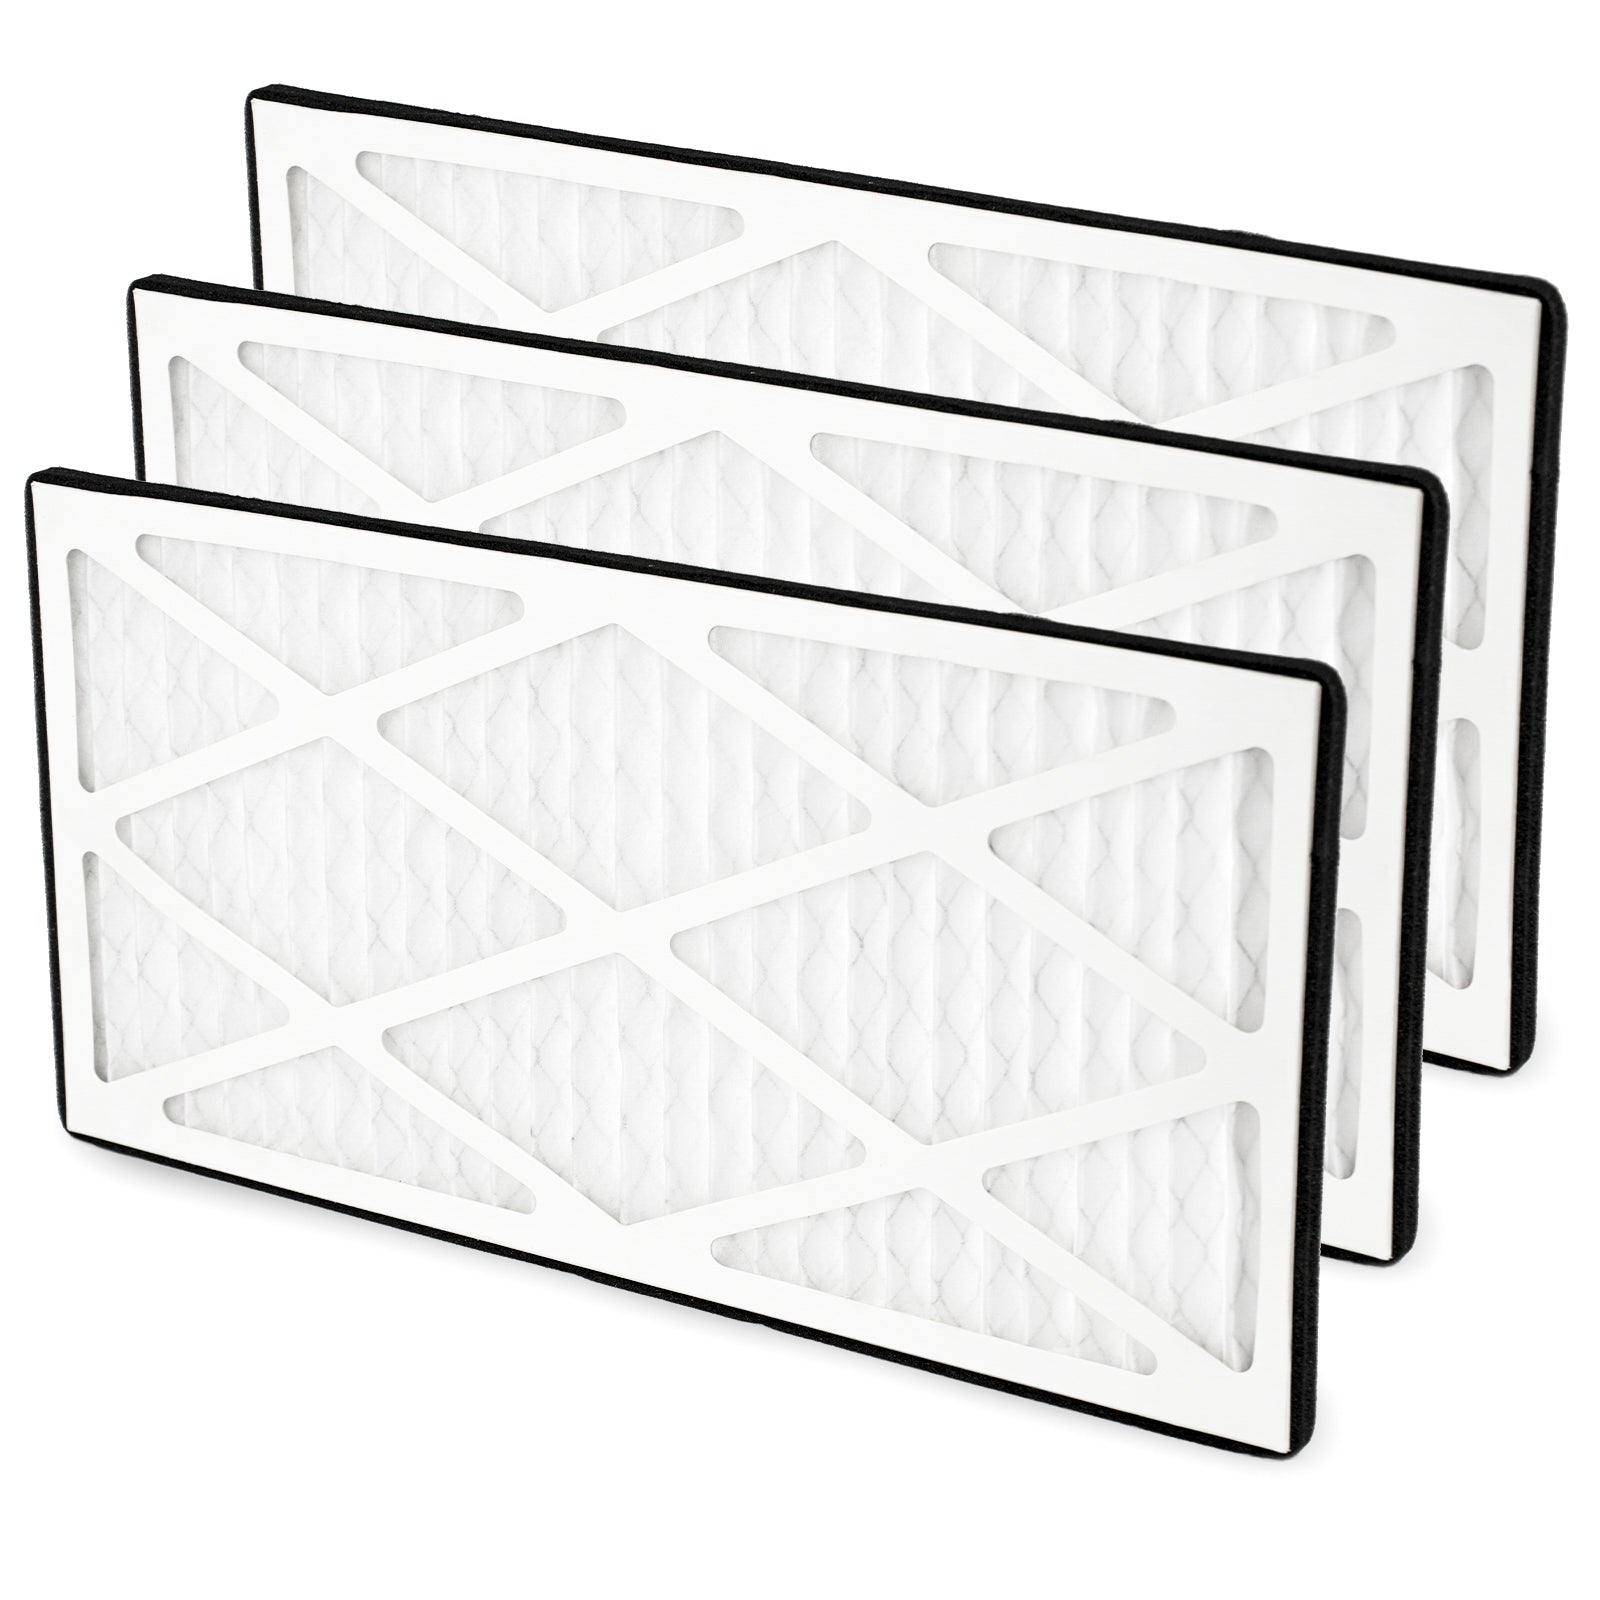 Purisystems 5-Micron Air Filters for PuriCare 1100/1100IG Air Filtration System, 3-Pack